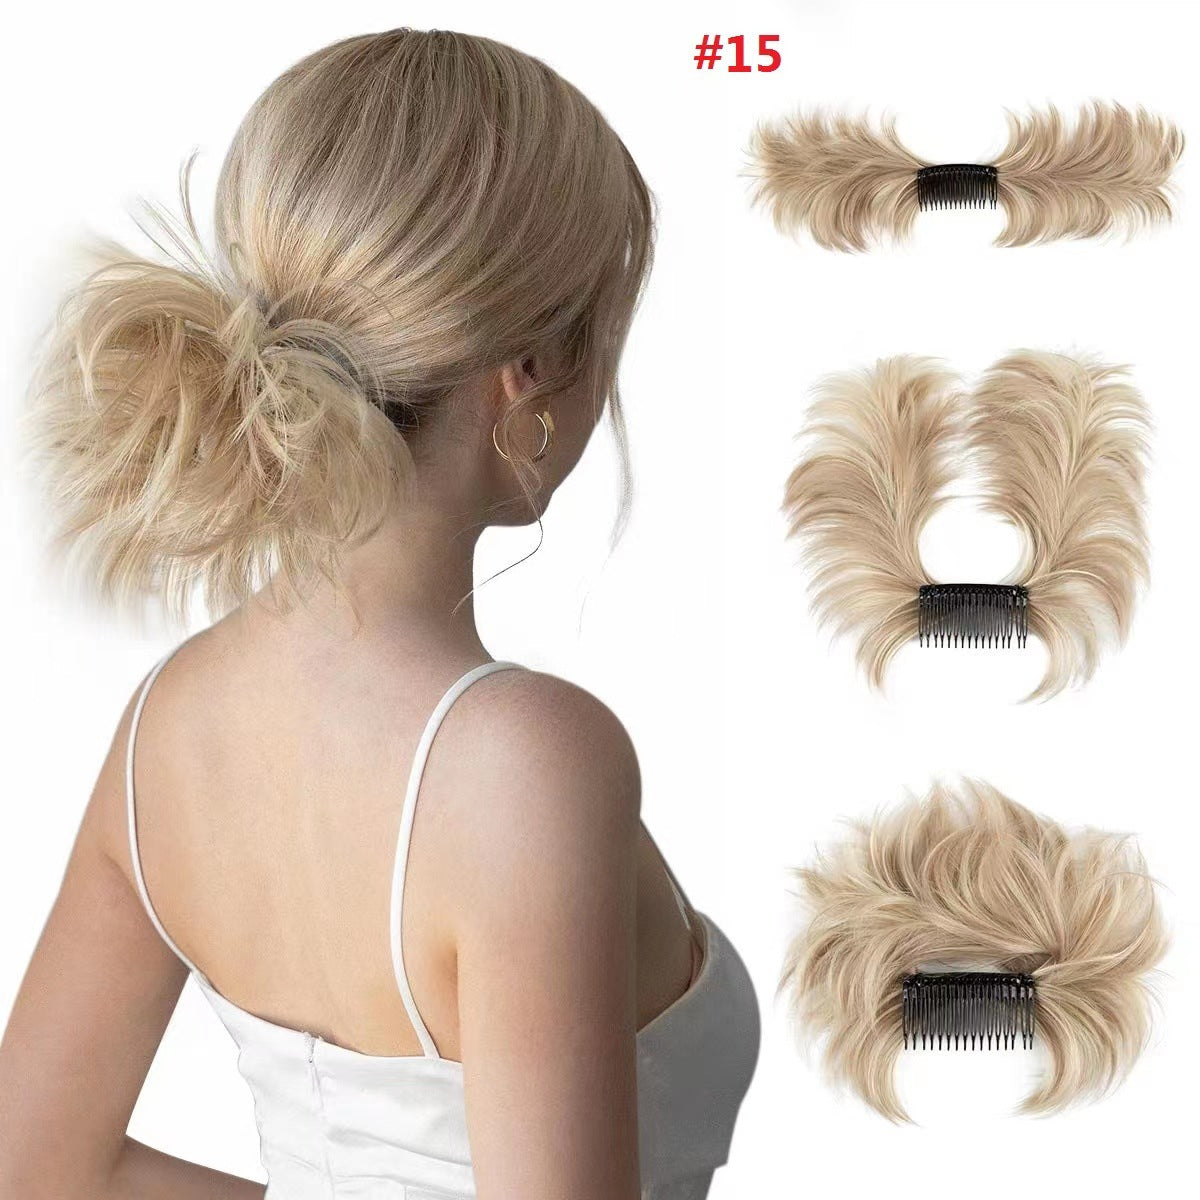 Bunease | Easy hairpieces with clips